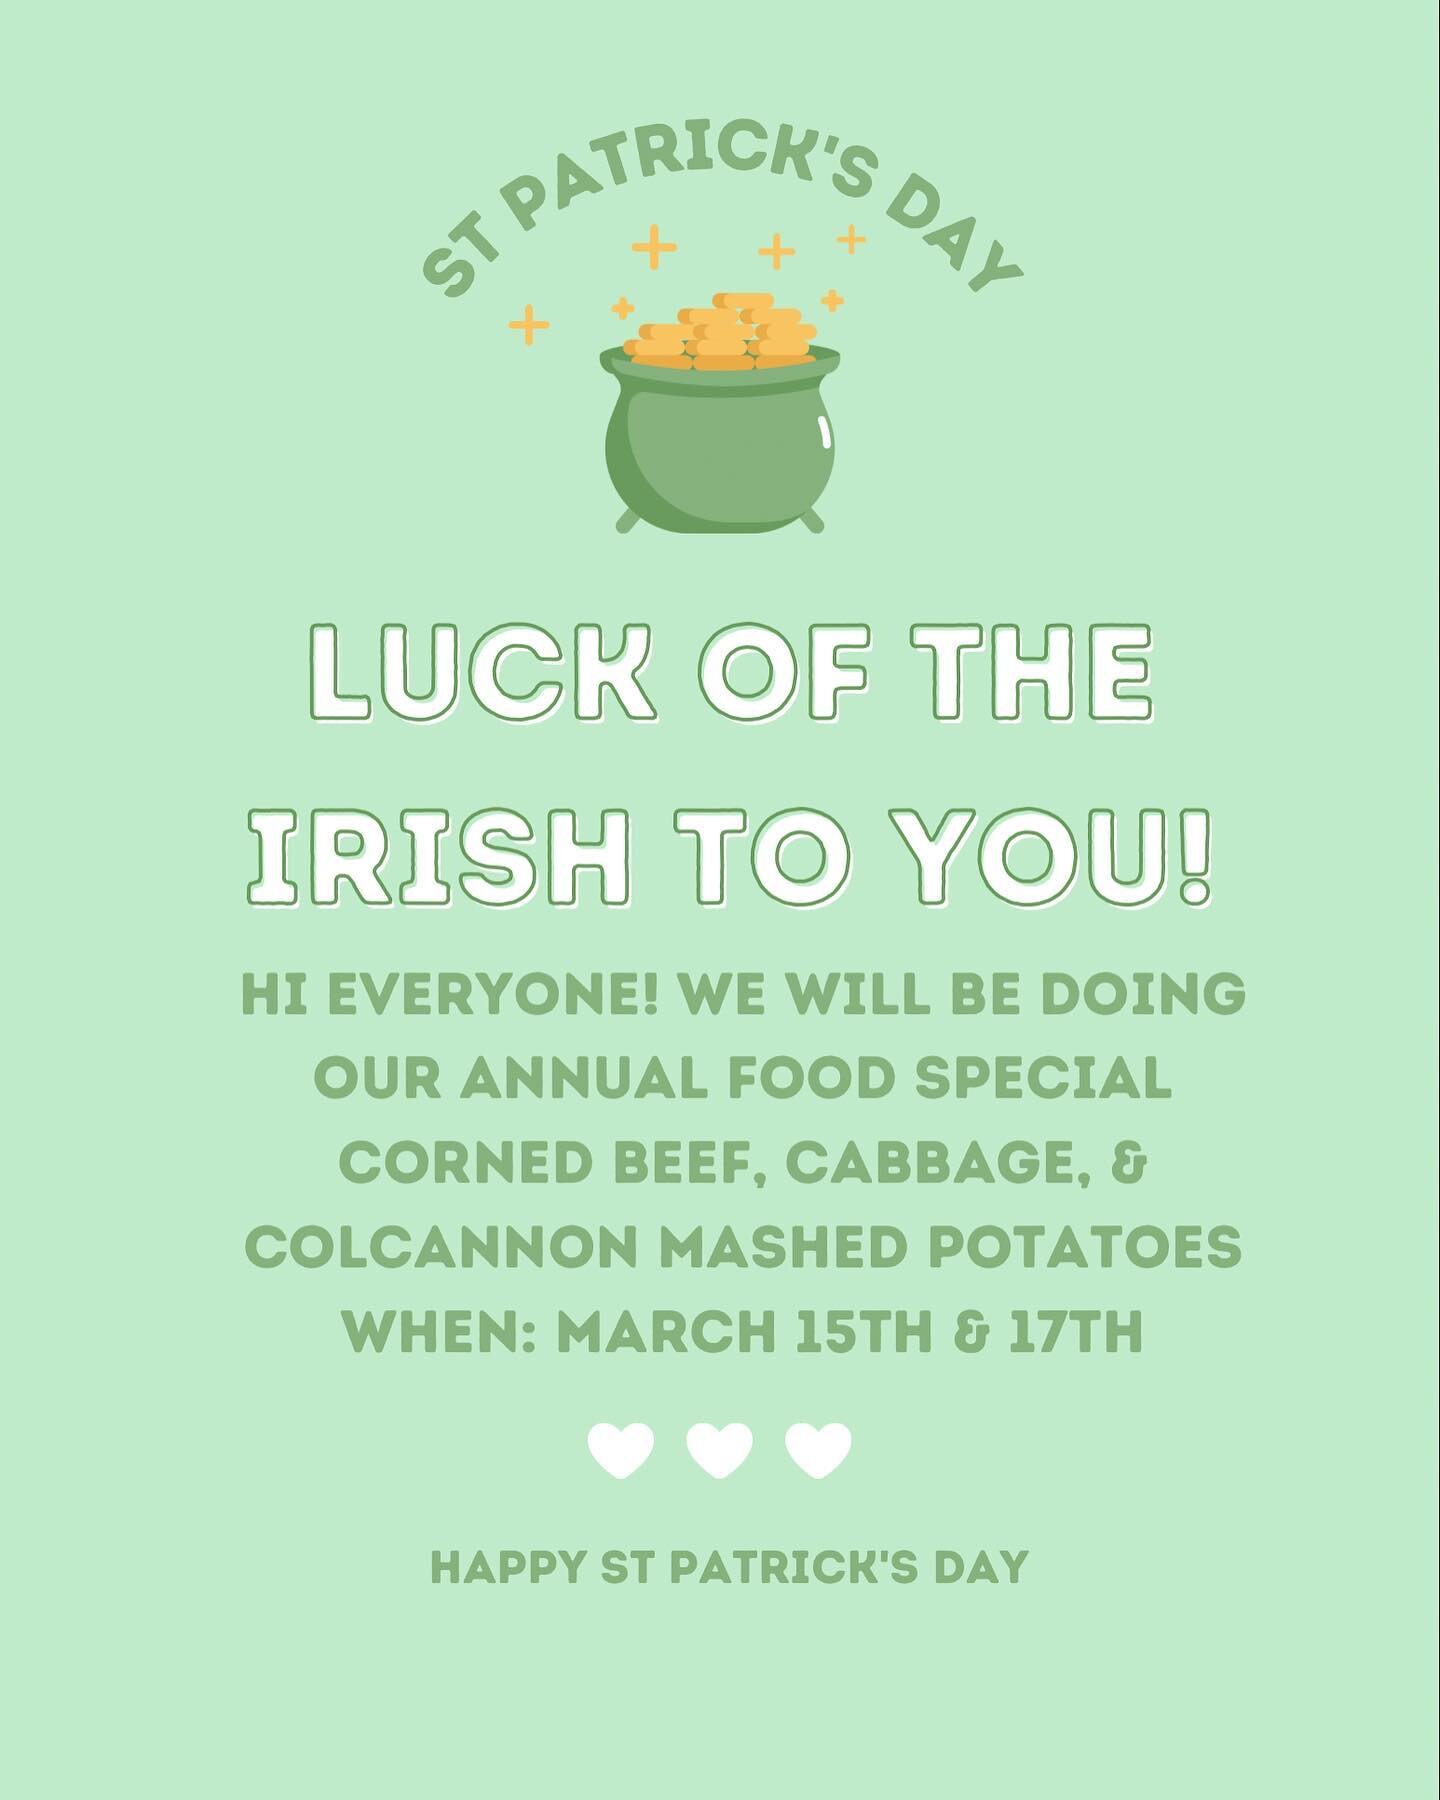 Food special Friday AND Sunday! 🍀🍻